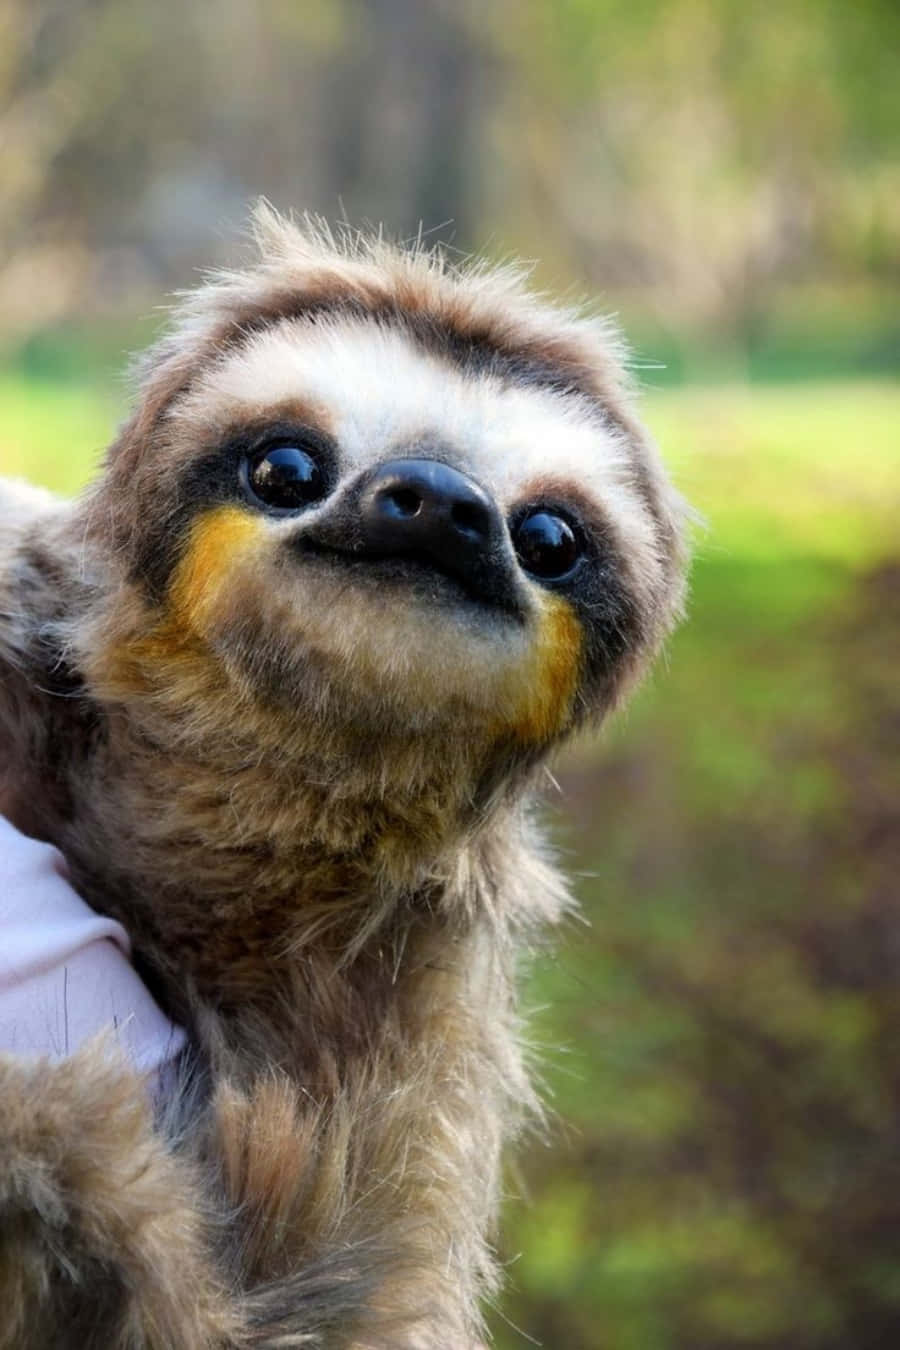 A Sloth Is Being Held By A Person